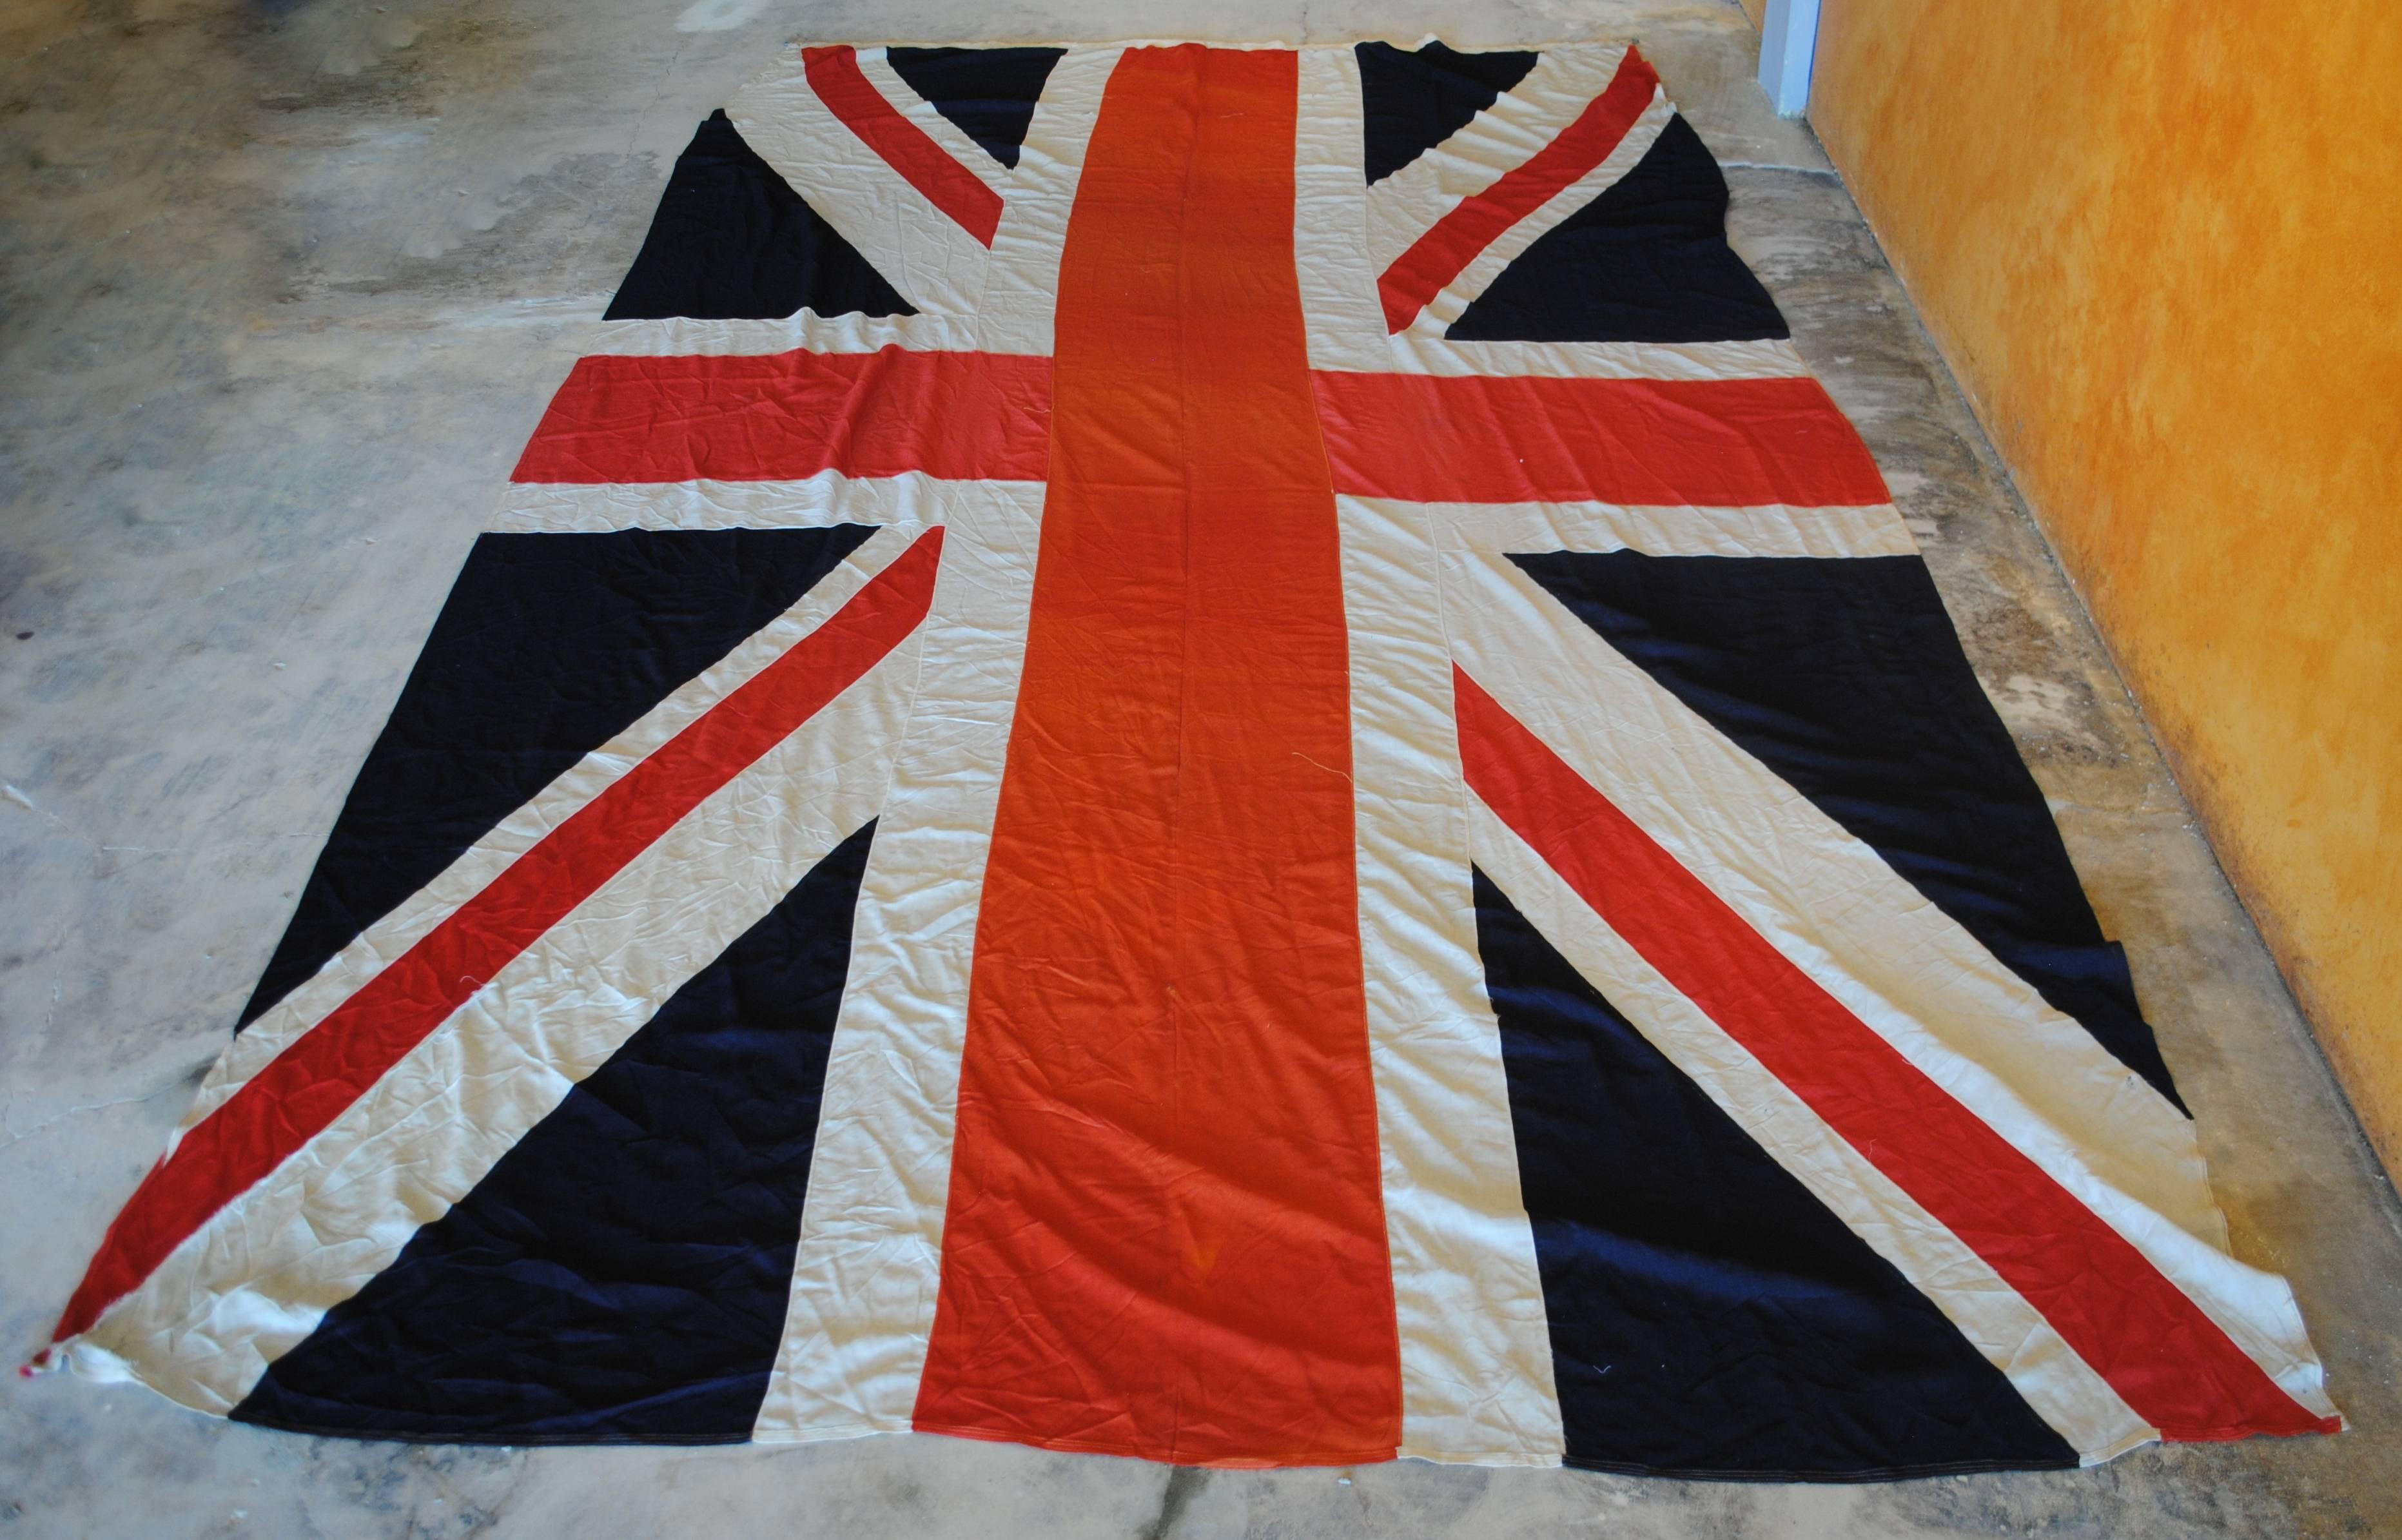 Enormous sewn early British flag.